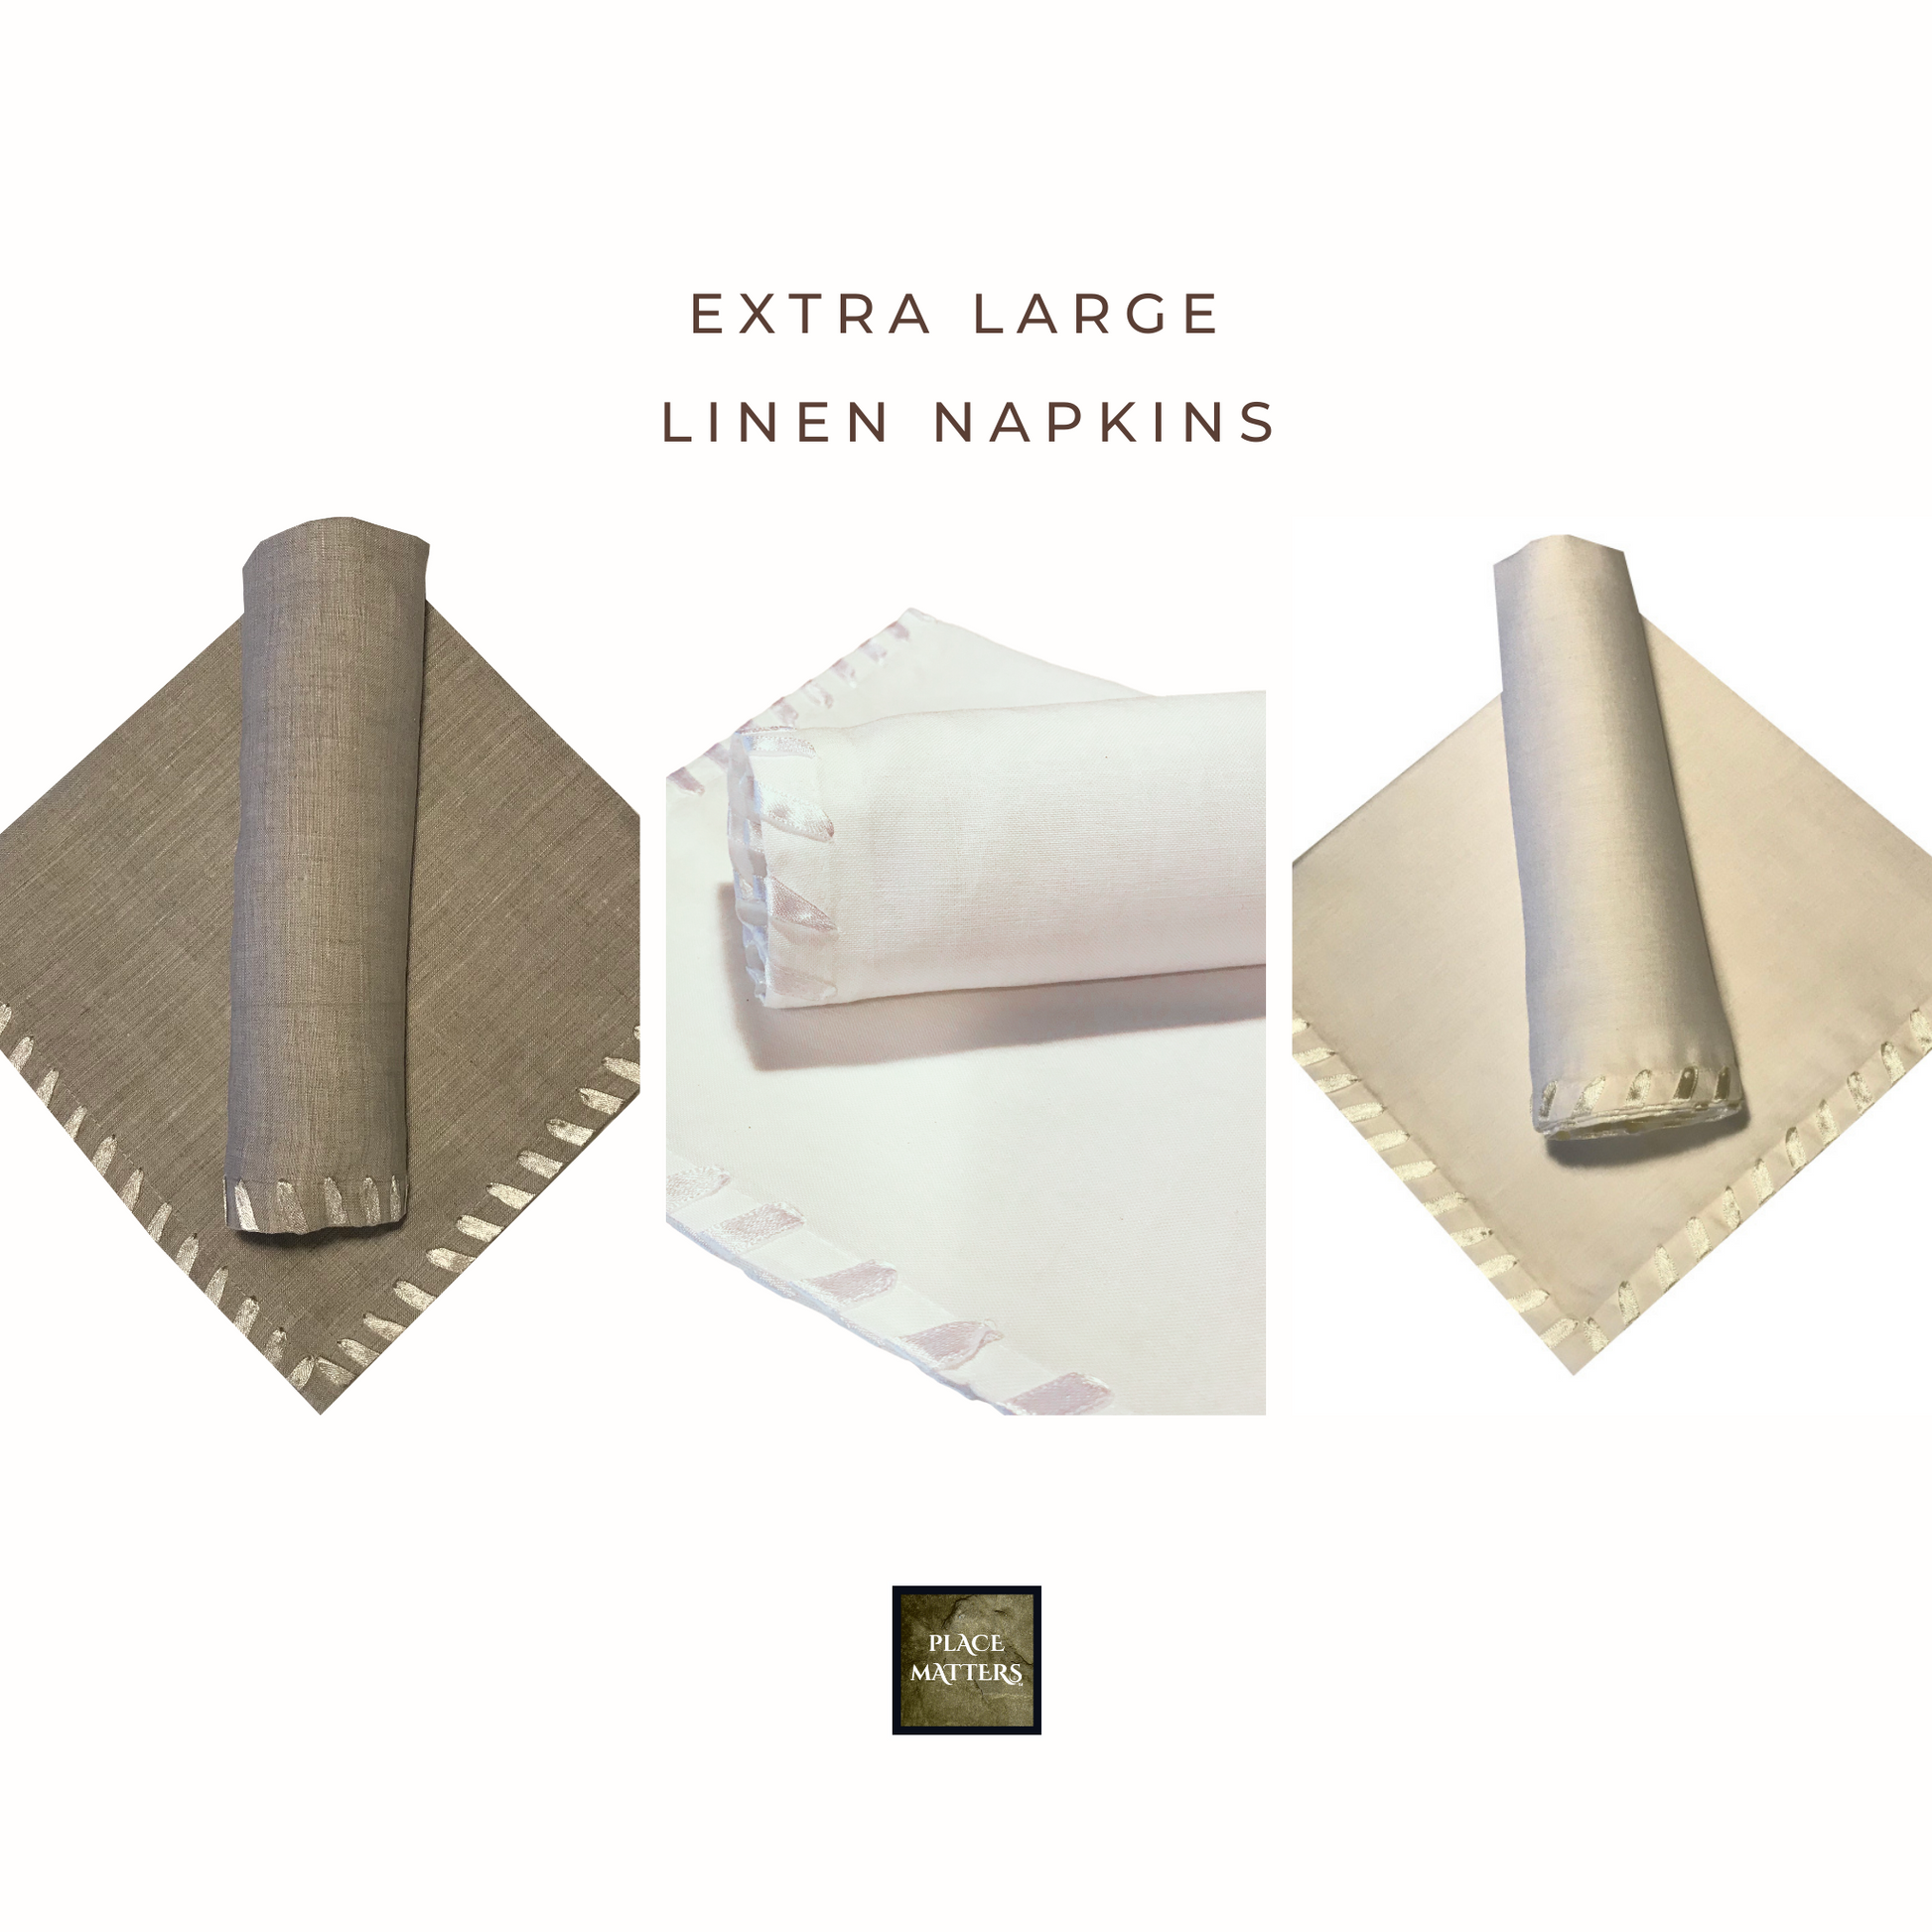 White Napkins Hand Stitched Edges 50cm Extra Large - Place Matters